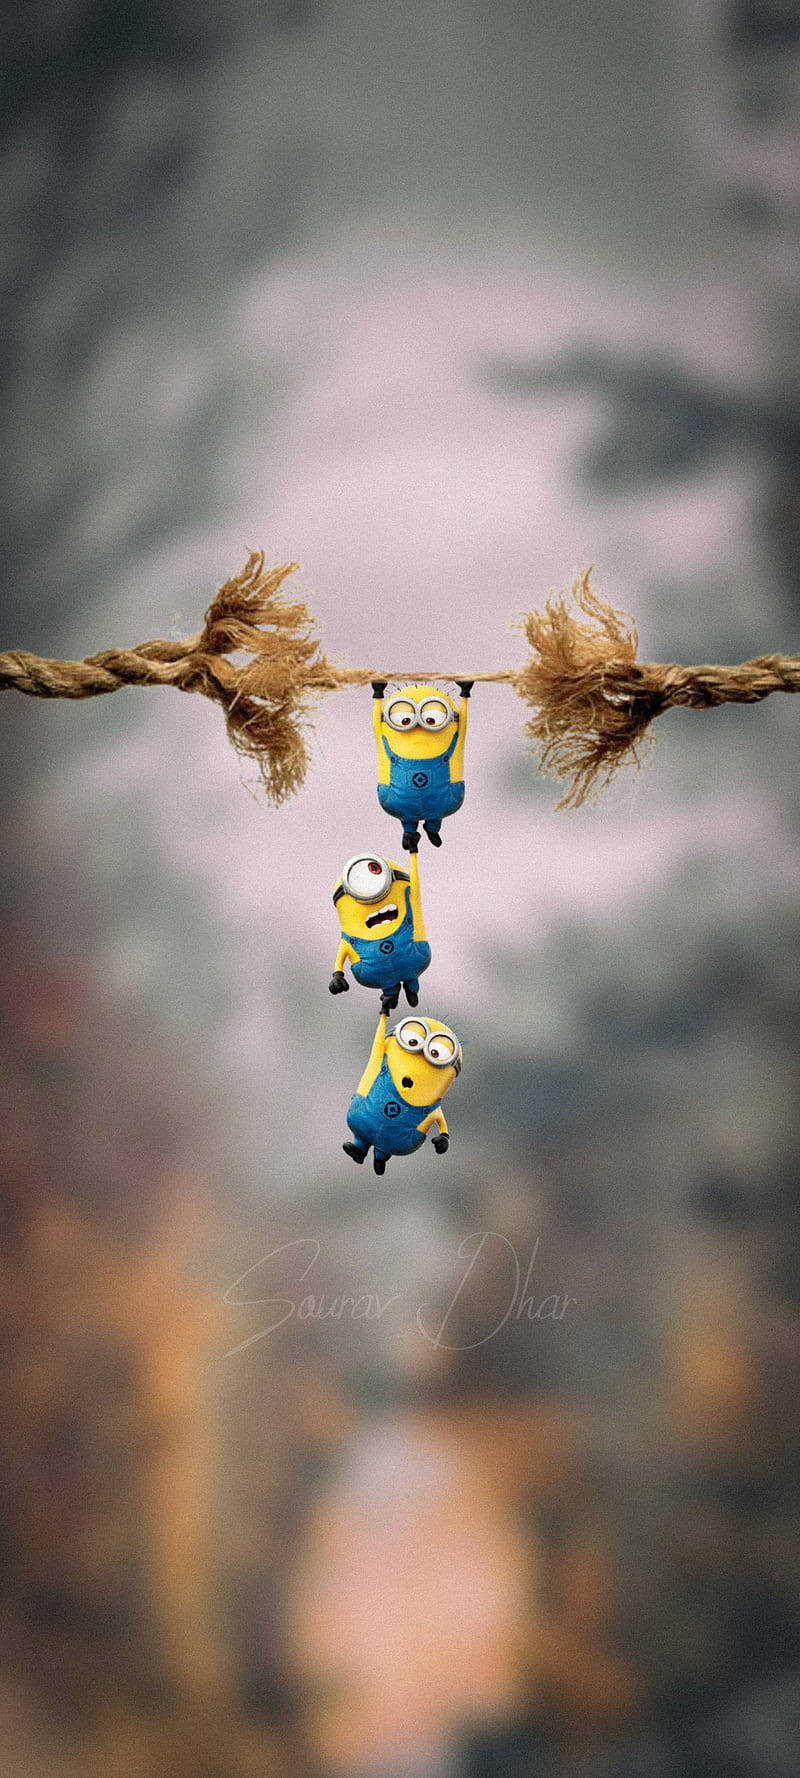 "Minion-Mania: Stay Connected with the Minion Phone" Wallpaper